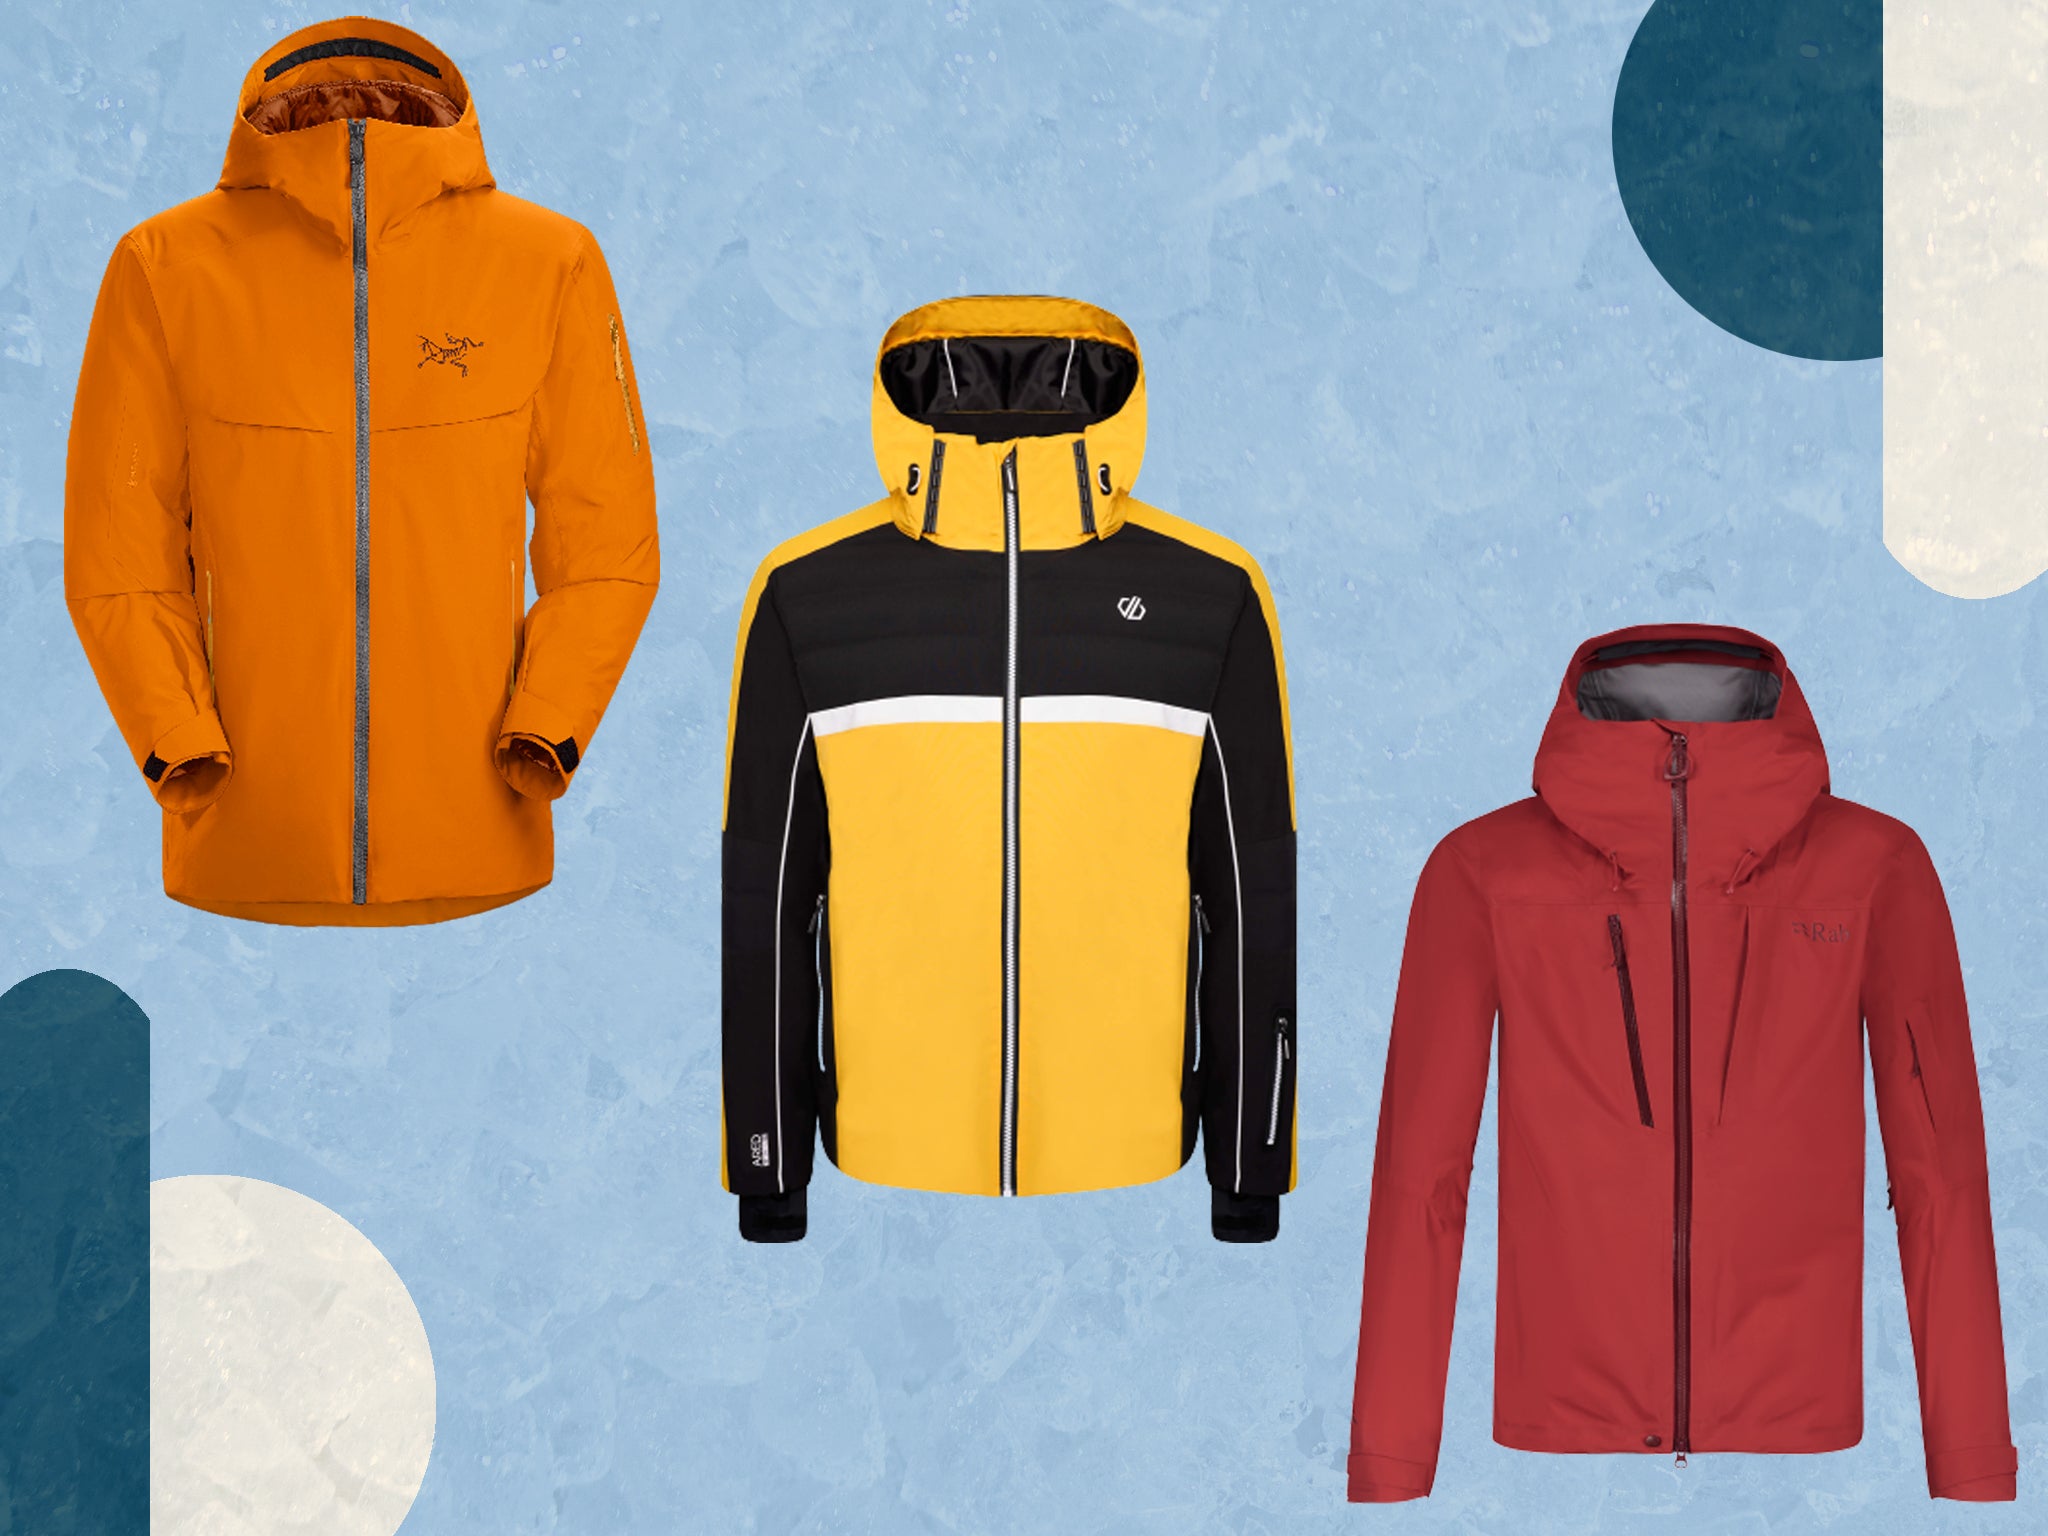 Best men's ski jackets 2021: Helly Hansen, The North Face and more 